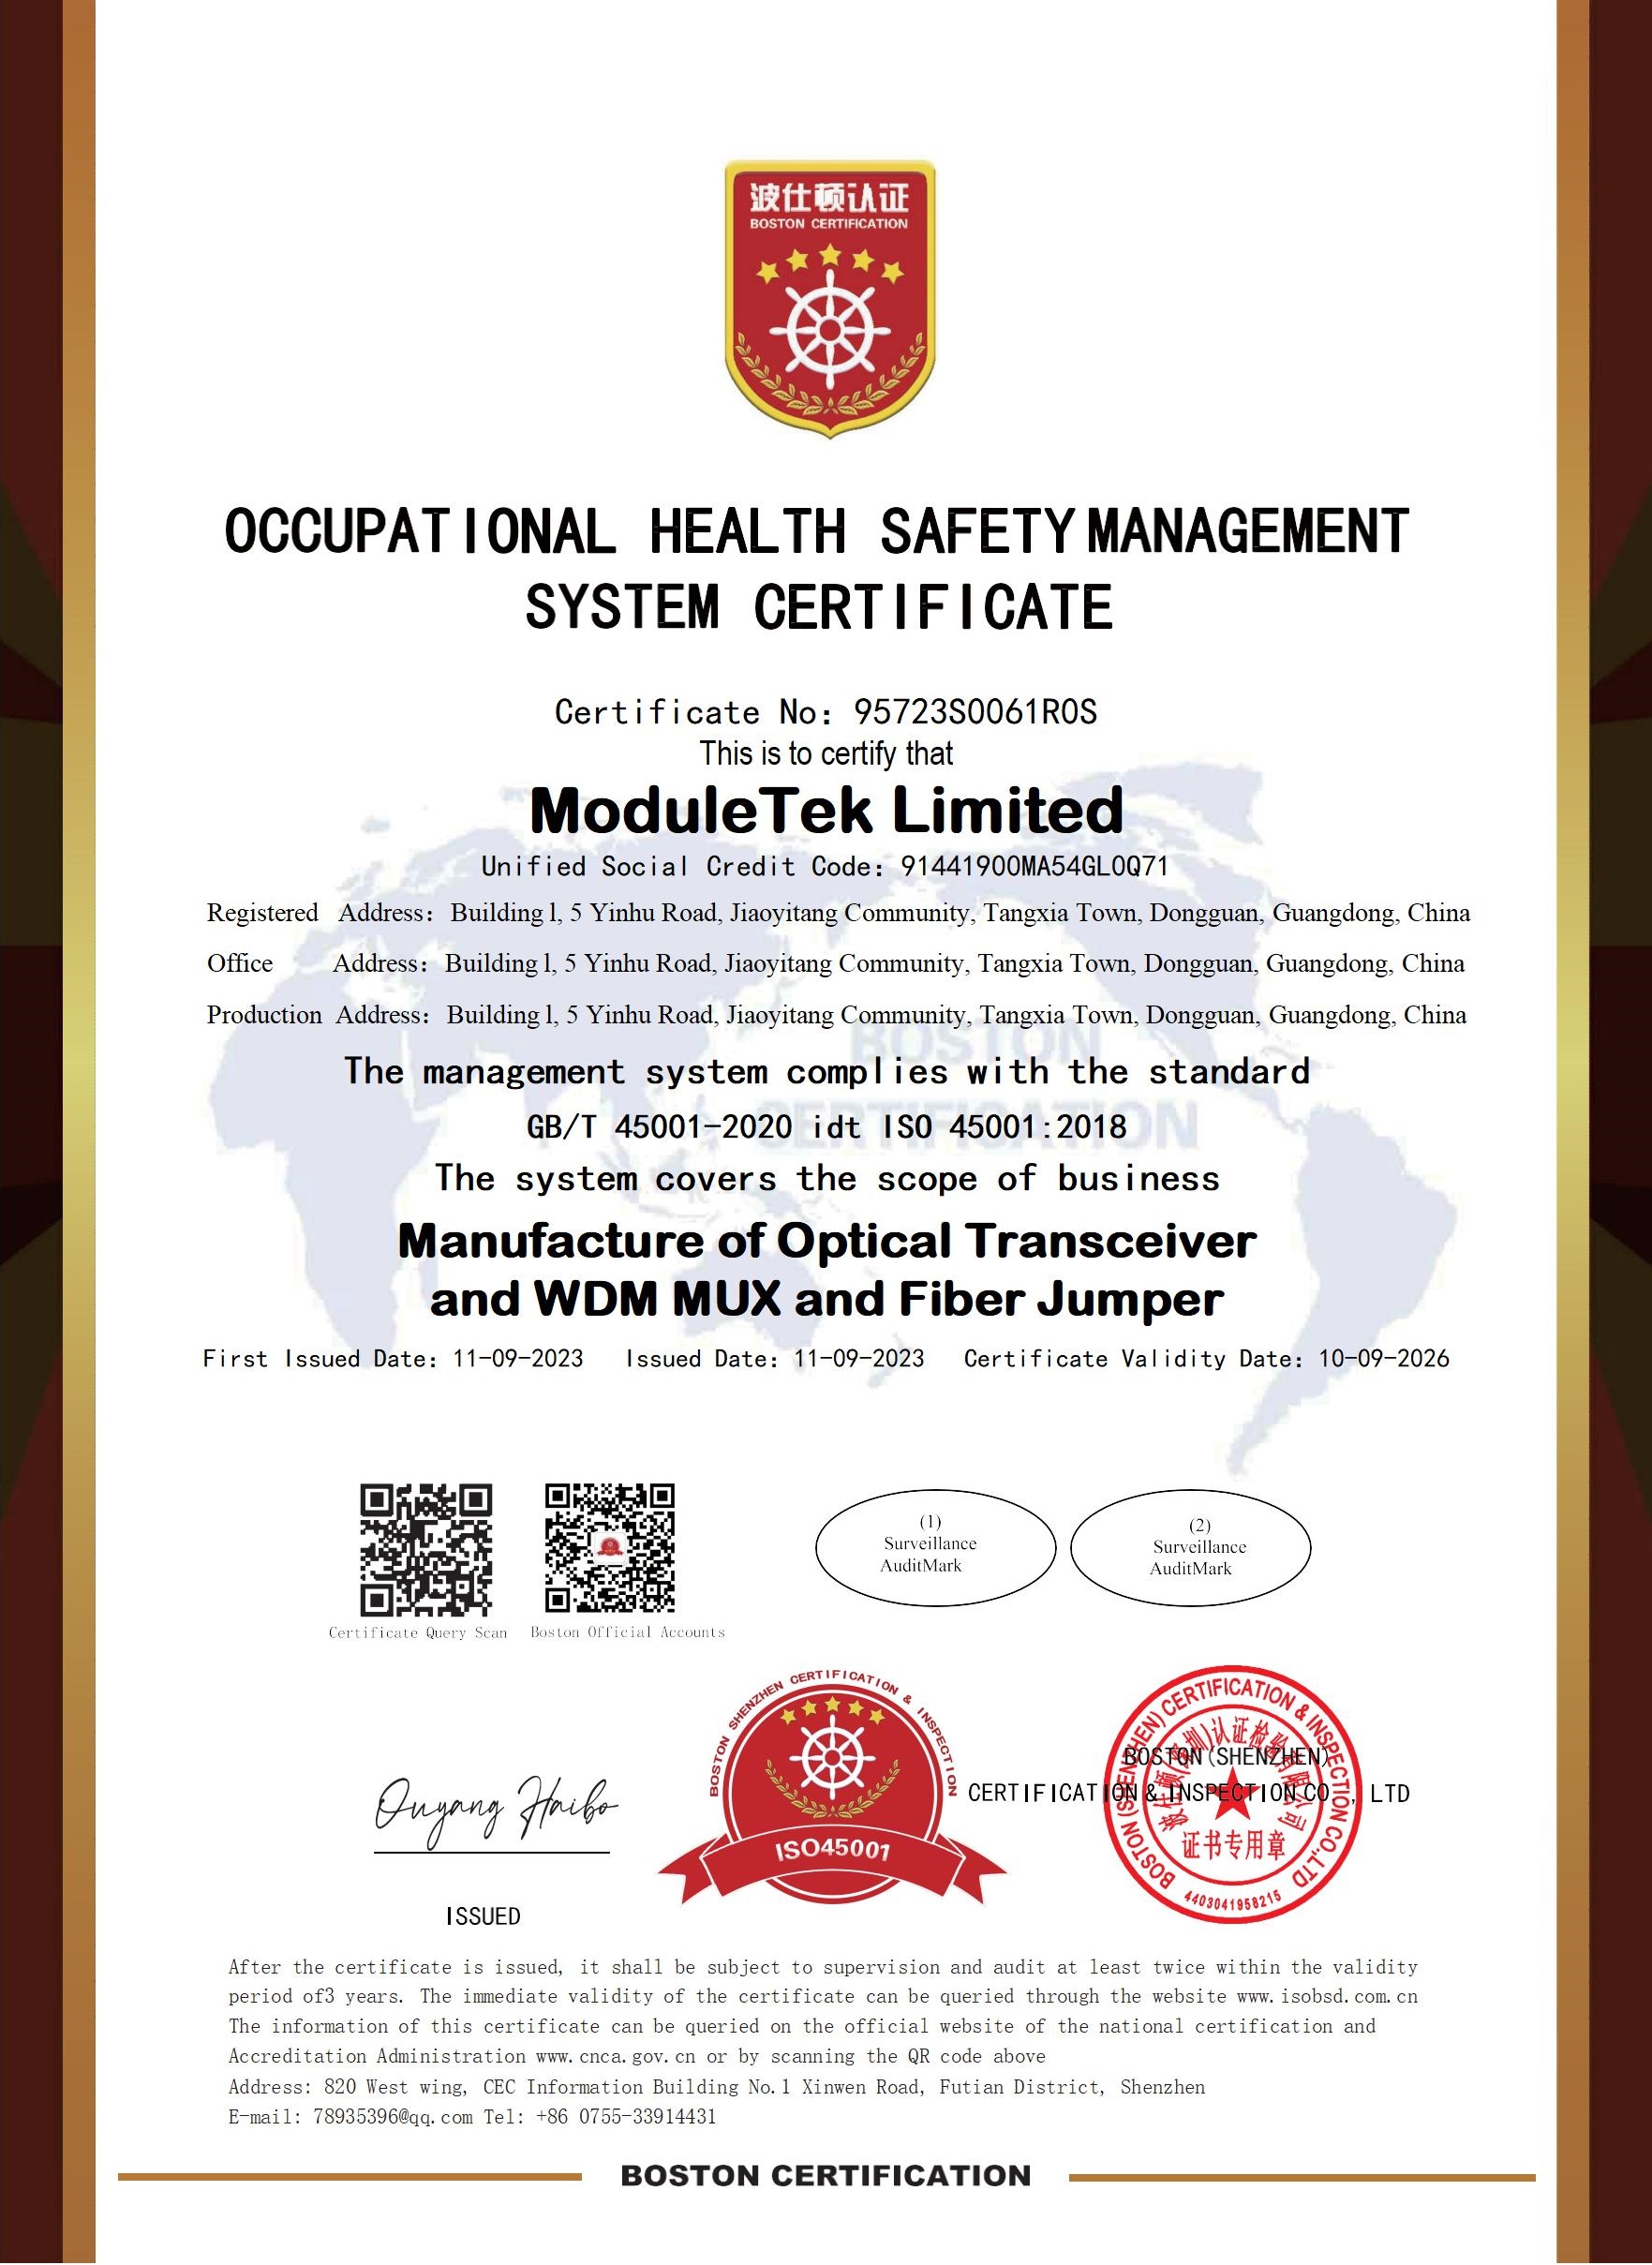 Occupational Health System Safety Management Certification